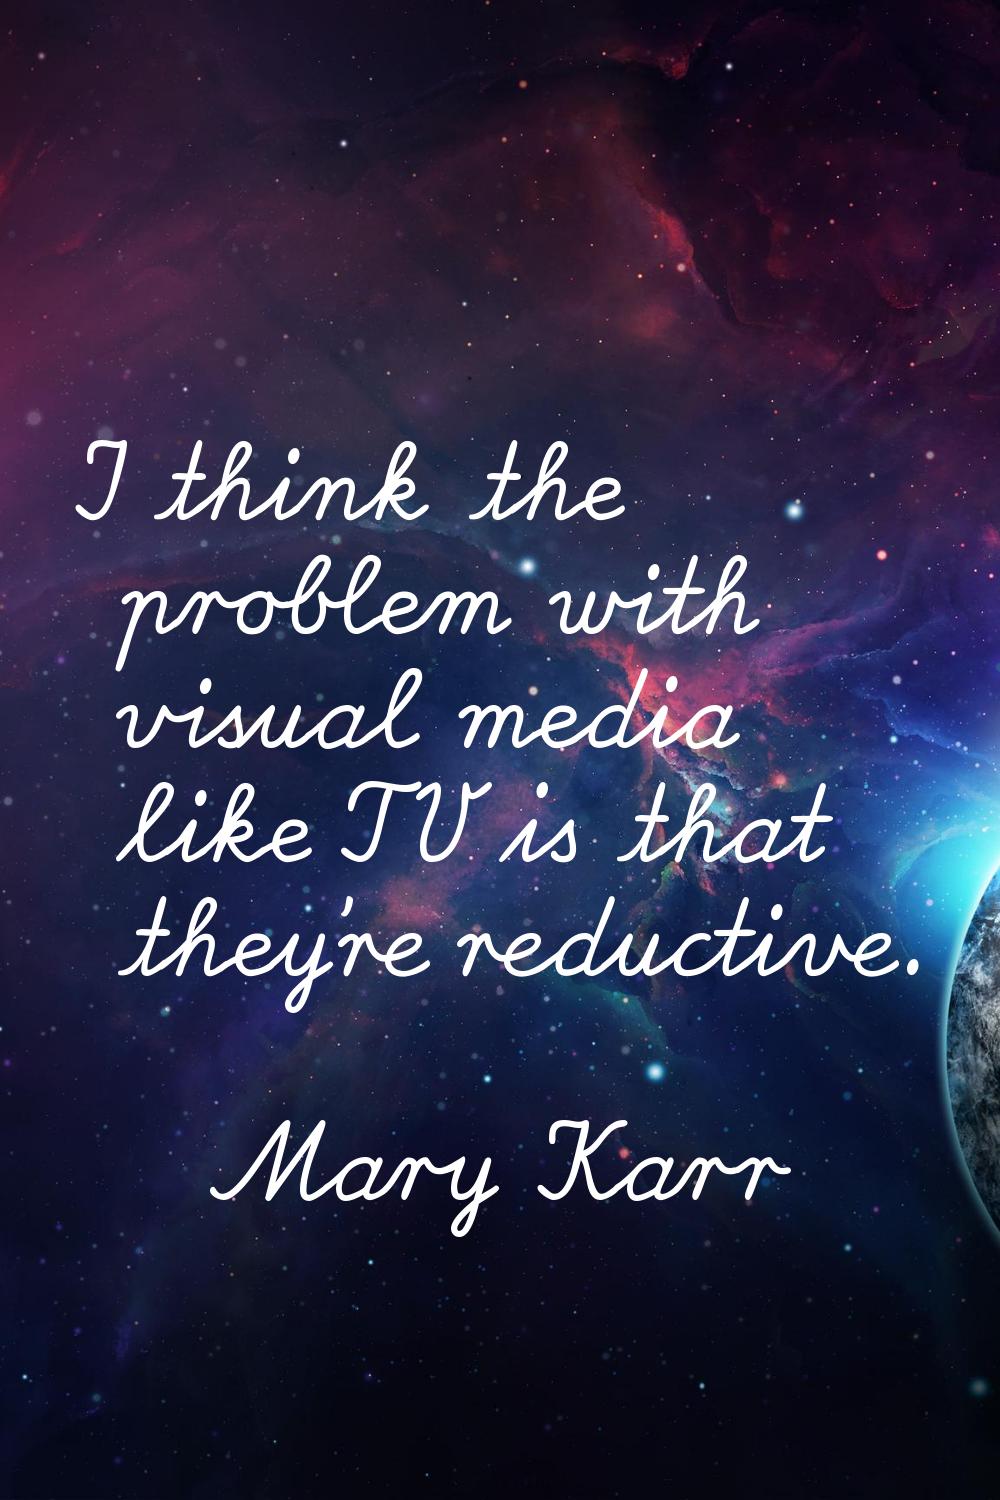 I think the problem with visual media like TV is that they're reductive.